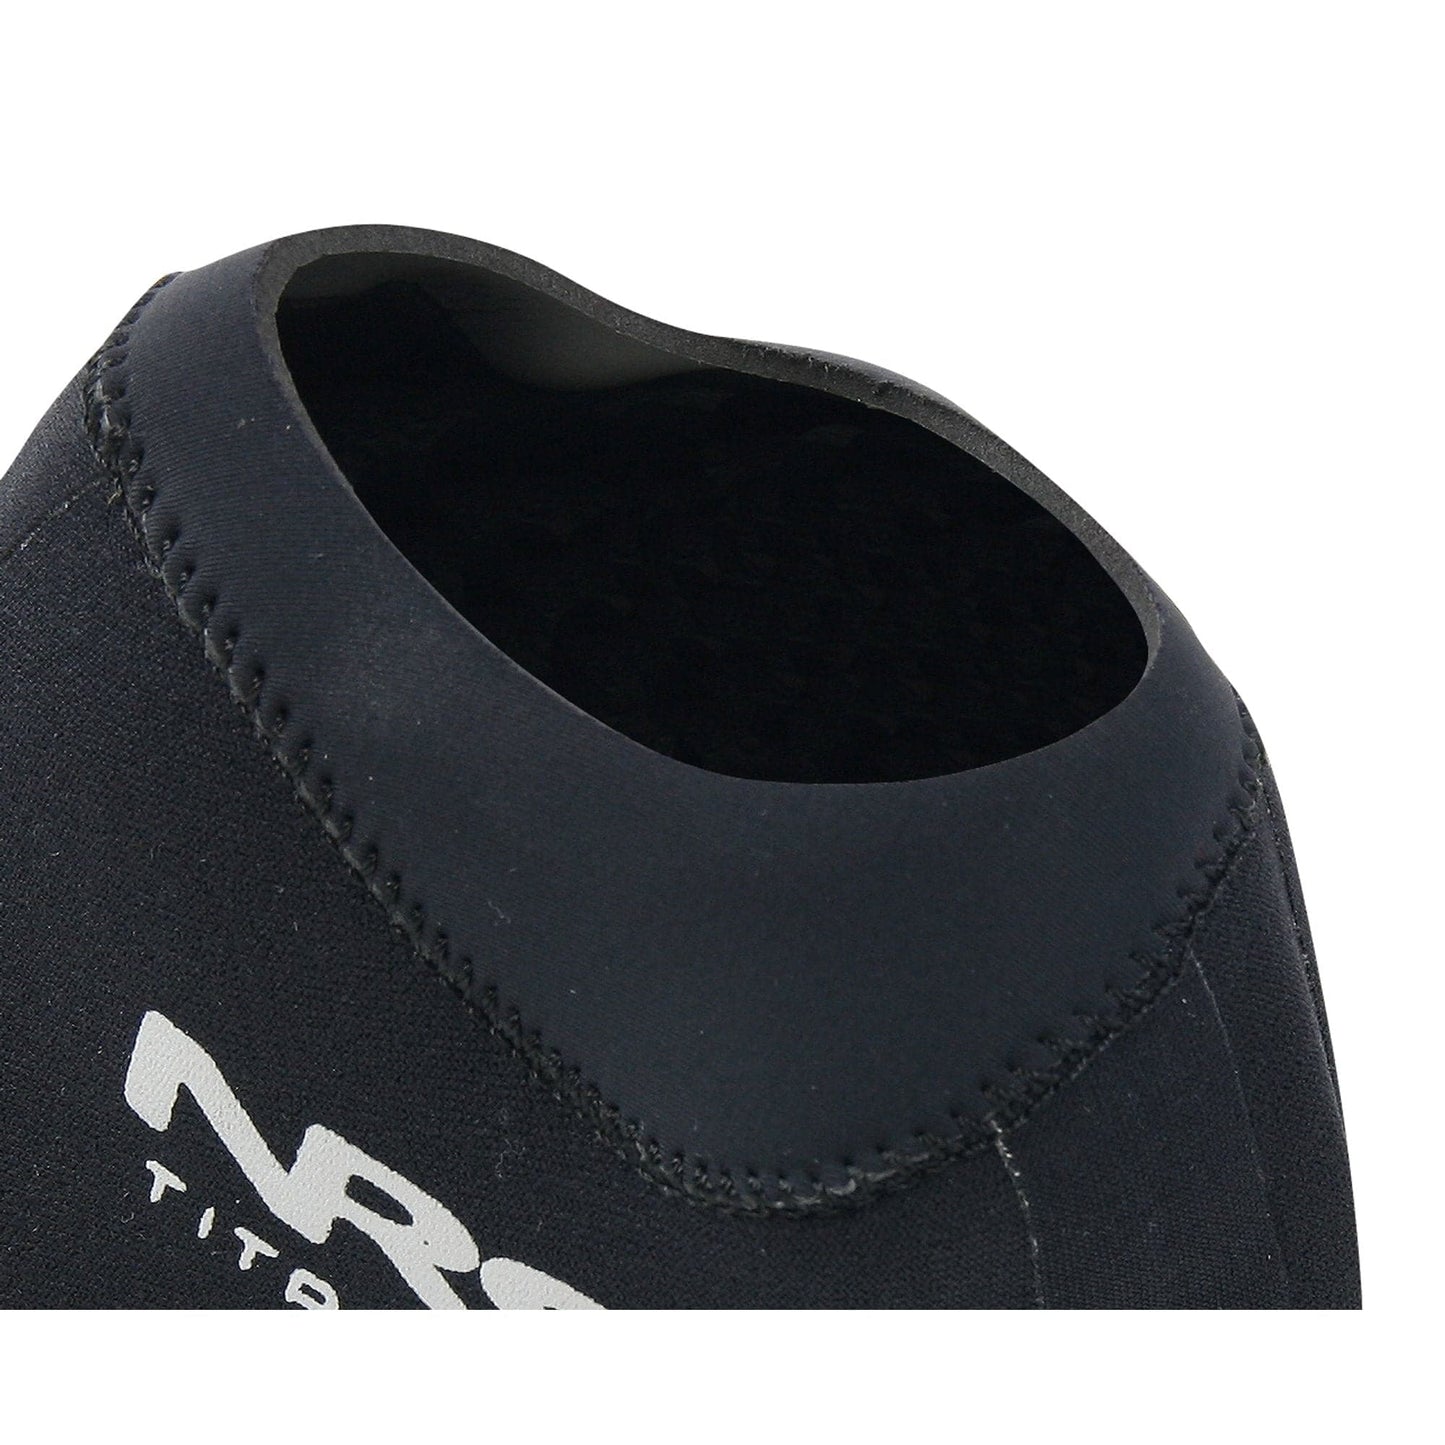 Featuring the Boundary Sock  manufactured by NRS shown here from a third angle.